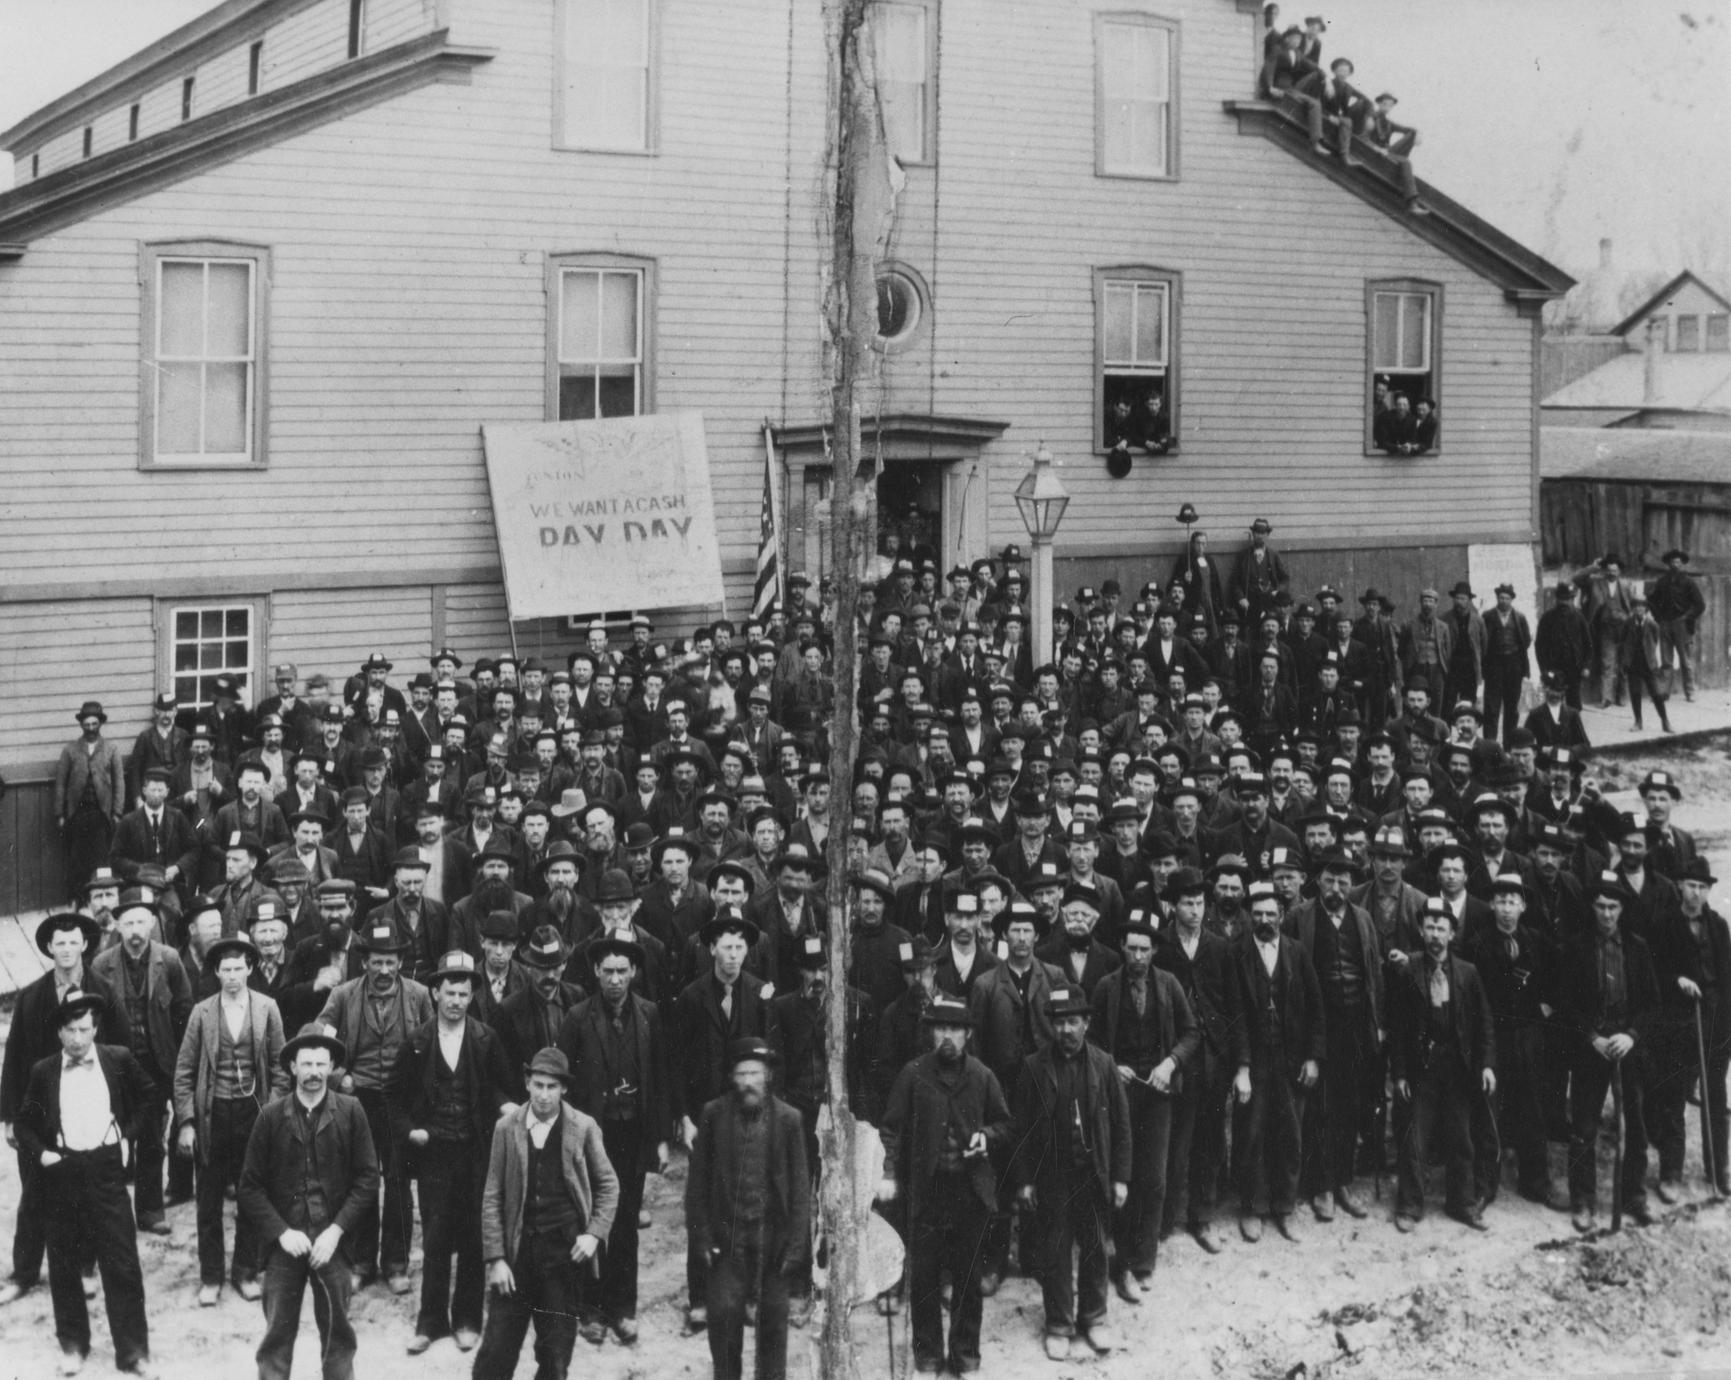 Strike at the Mann Brothers factory 1889-1890.